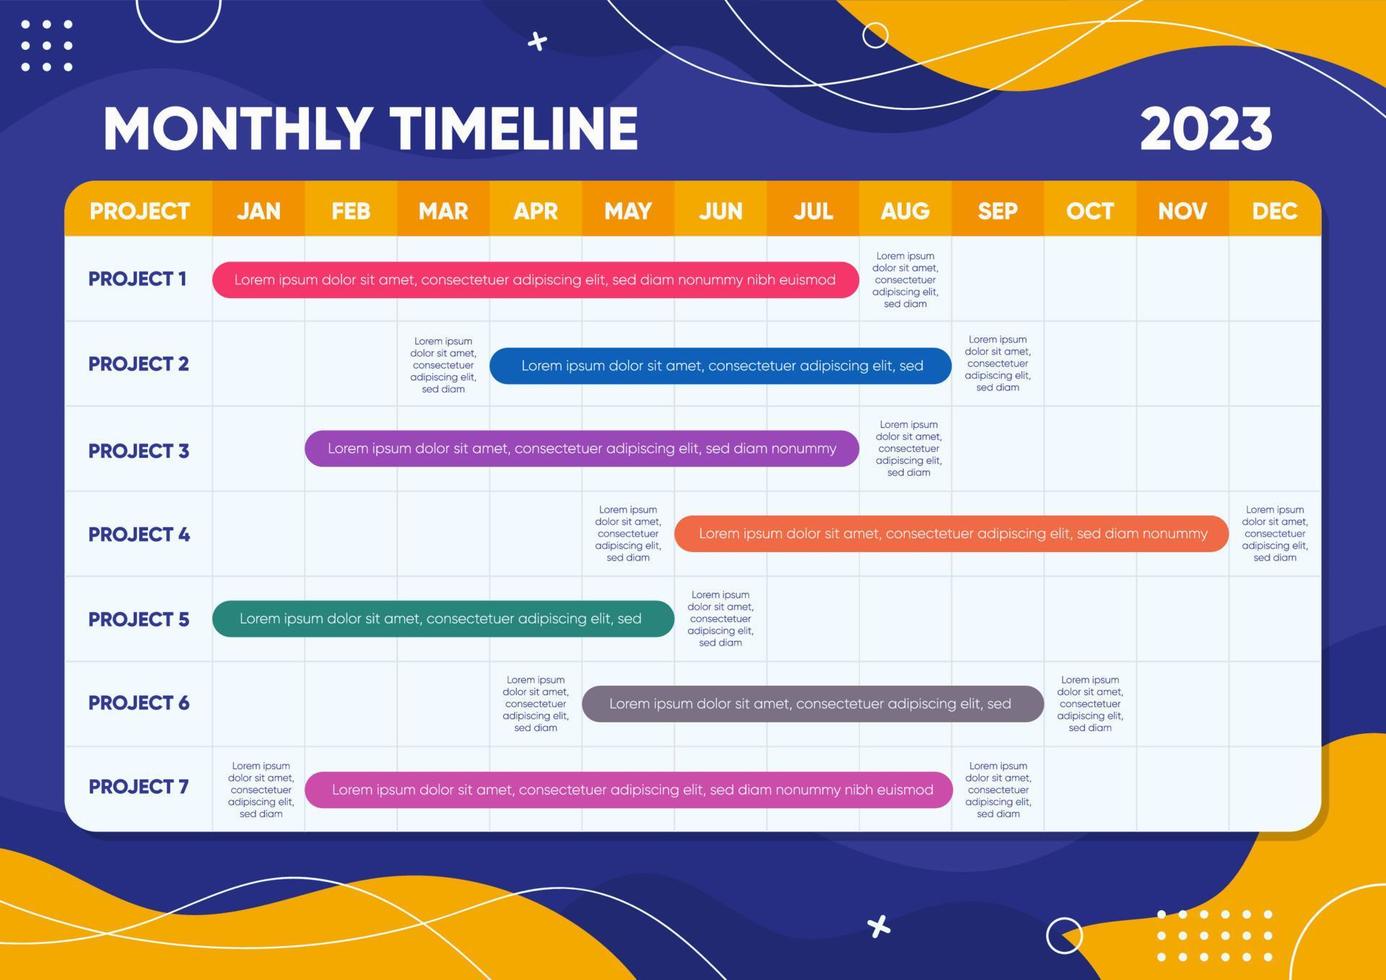 Monthly Timeline for Business Planner Projects Template vector